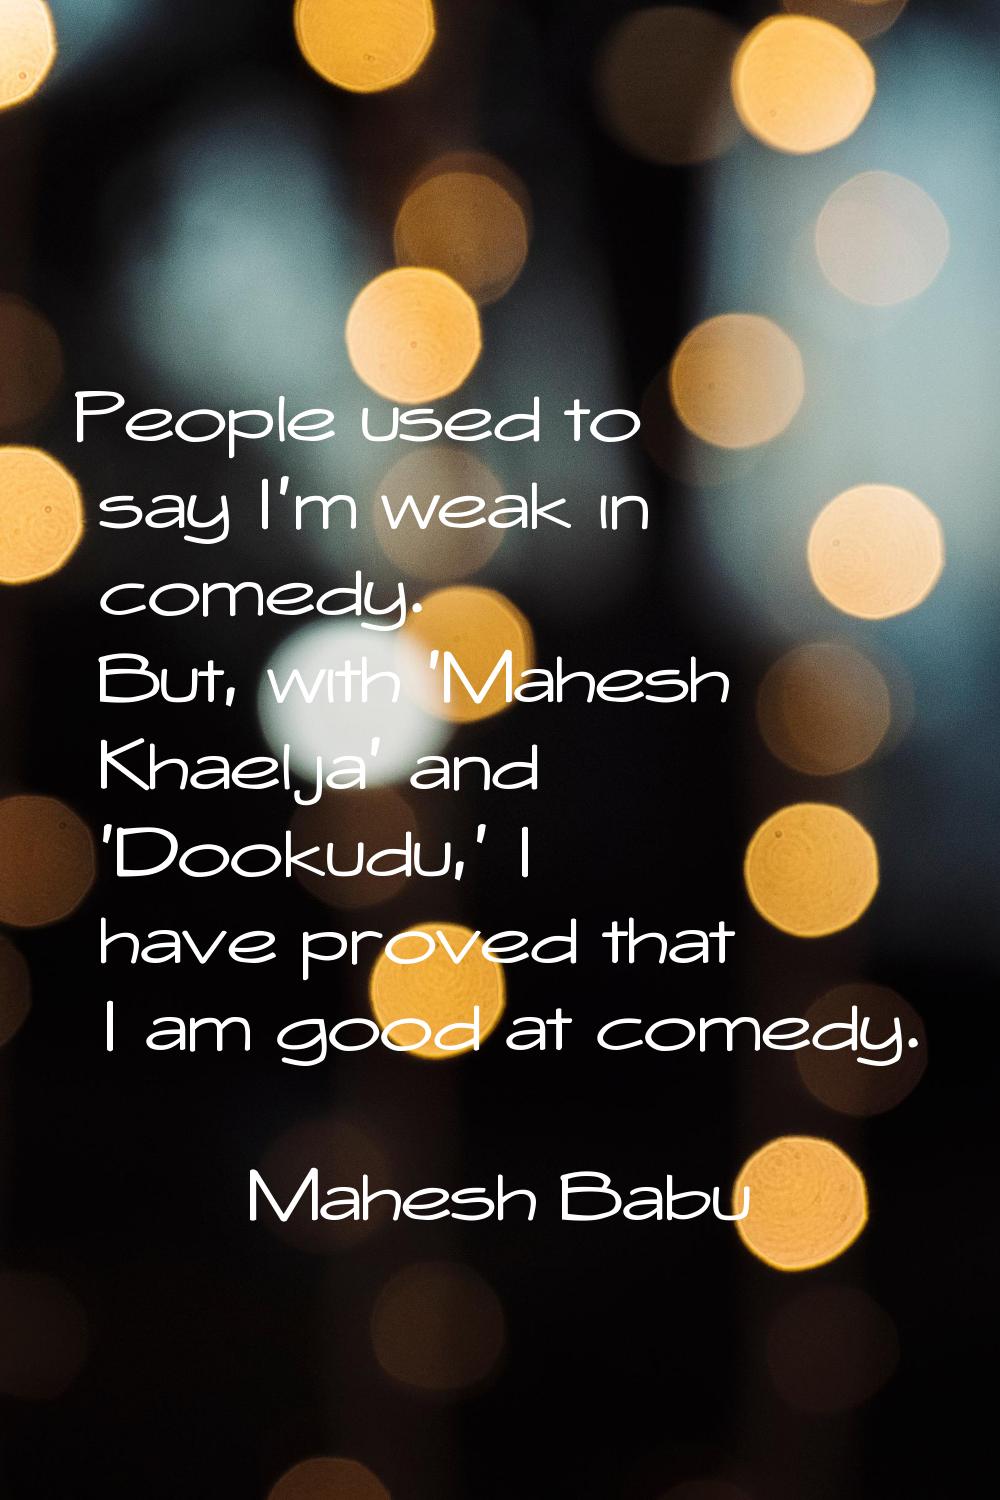 People used to say I'm weak in comedy. But, with 'Mahesh Khaelja' and 'Dookudu,' I have proved that